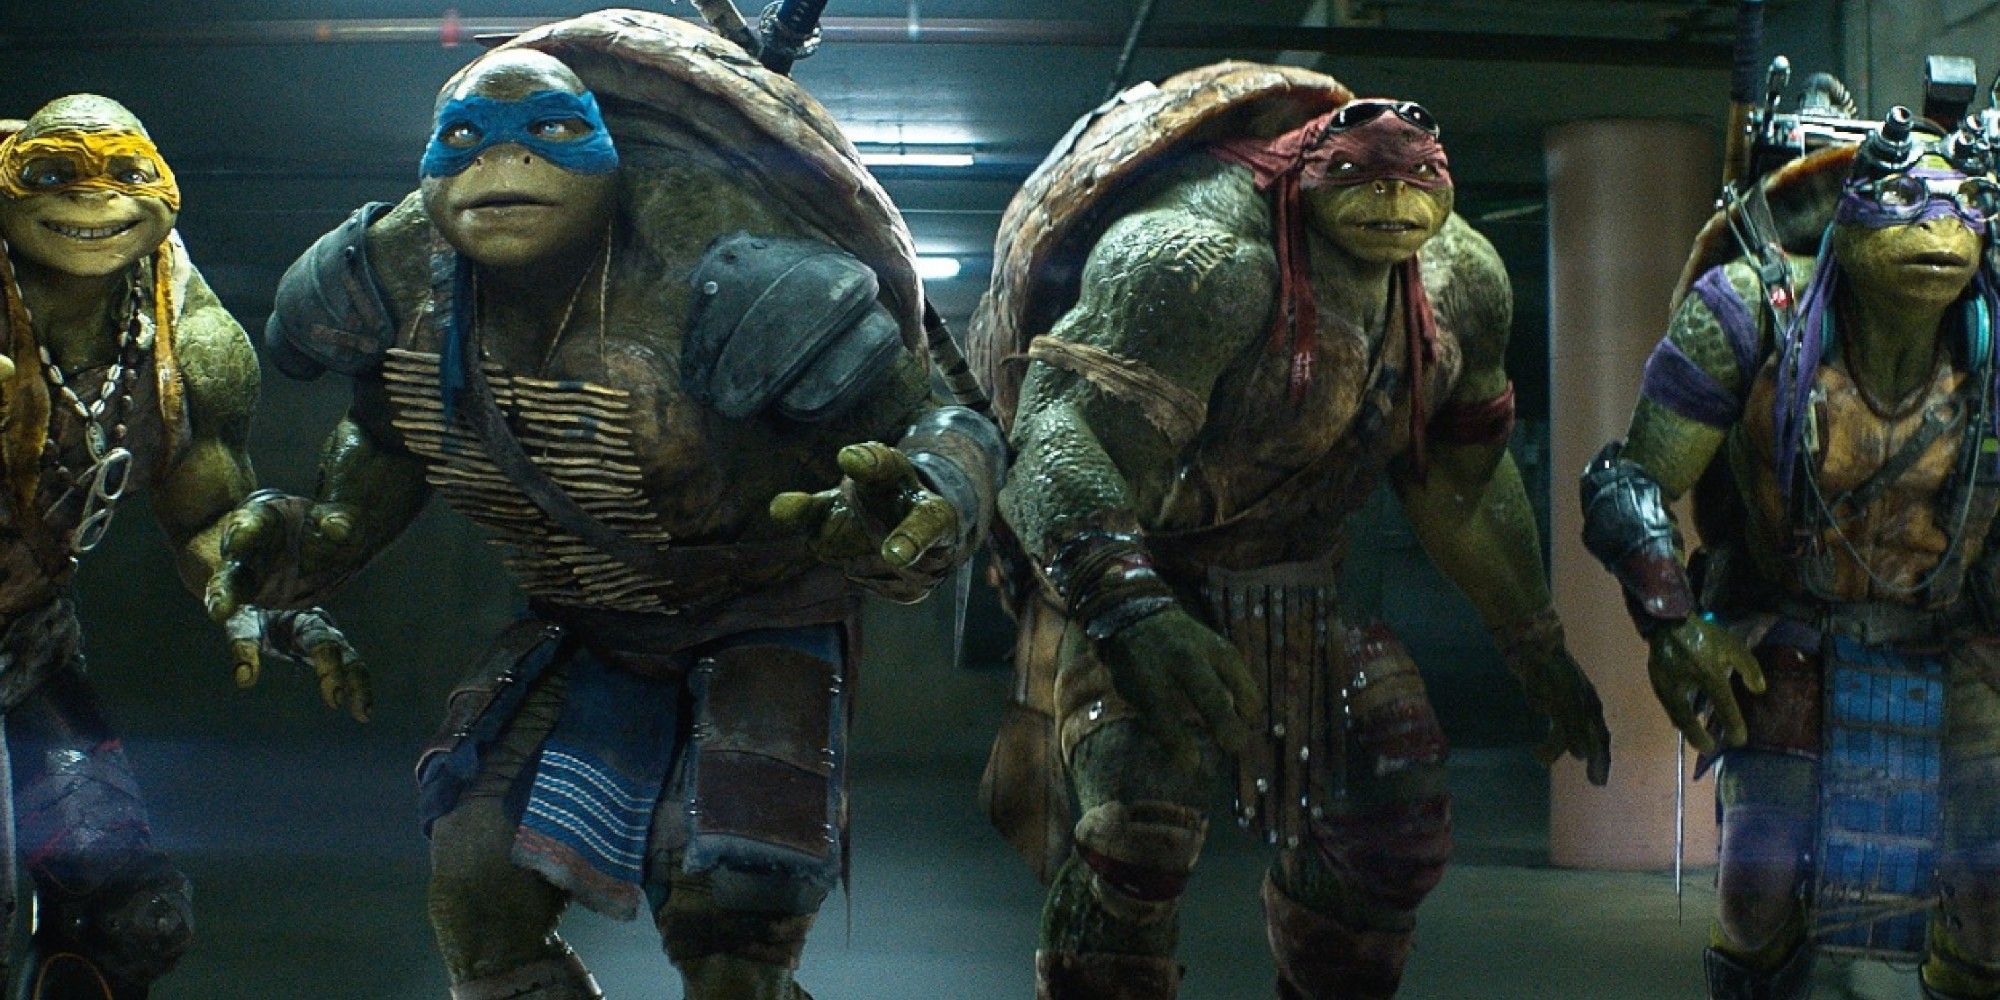 The TMNT Movie Reboot Should Learn From The Forgotten 2003 TV Show